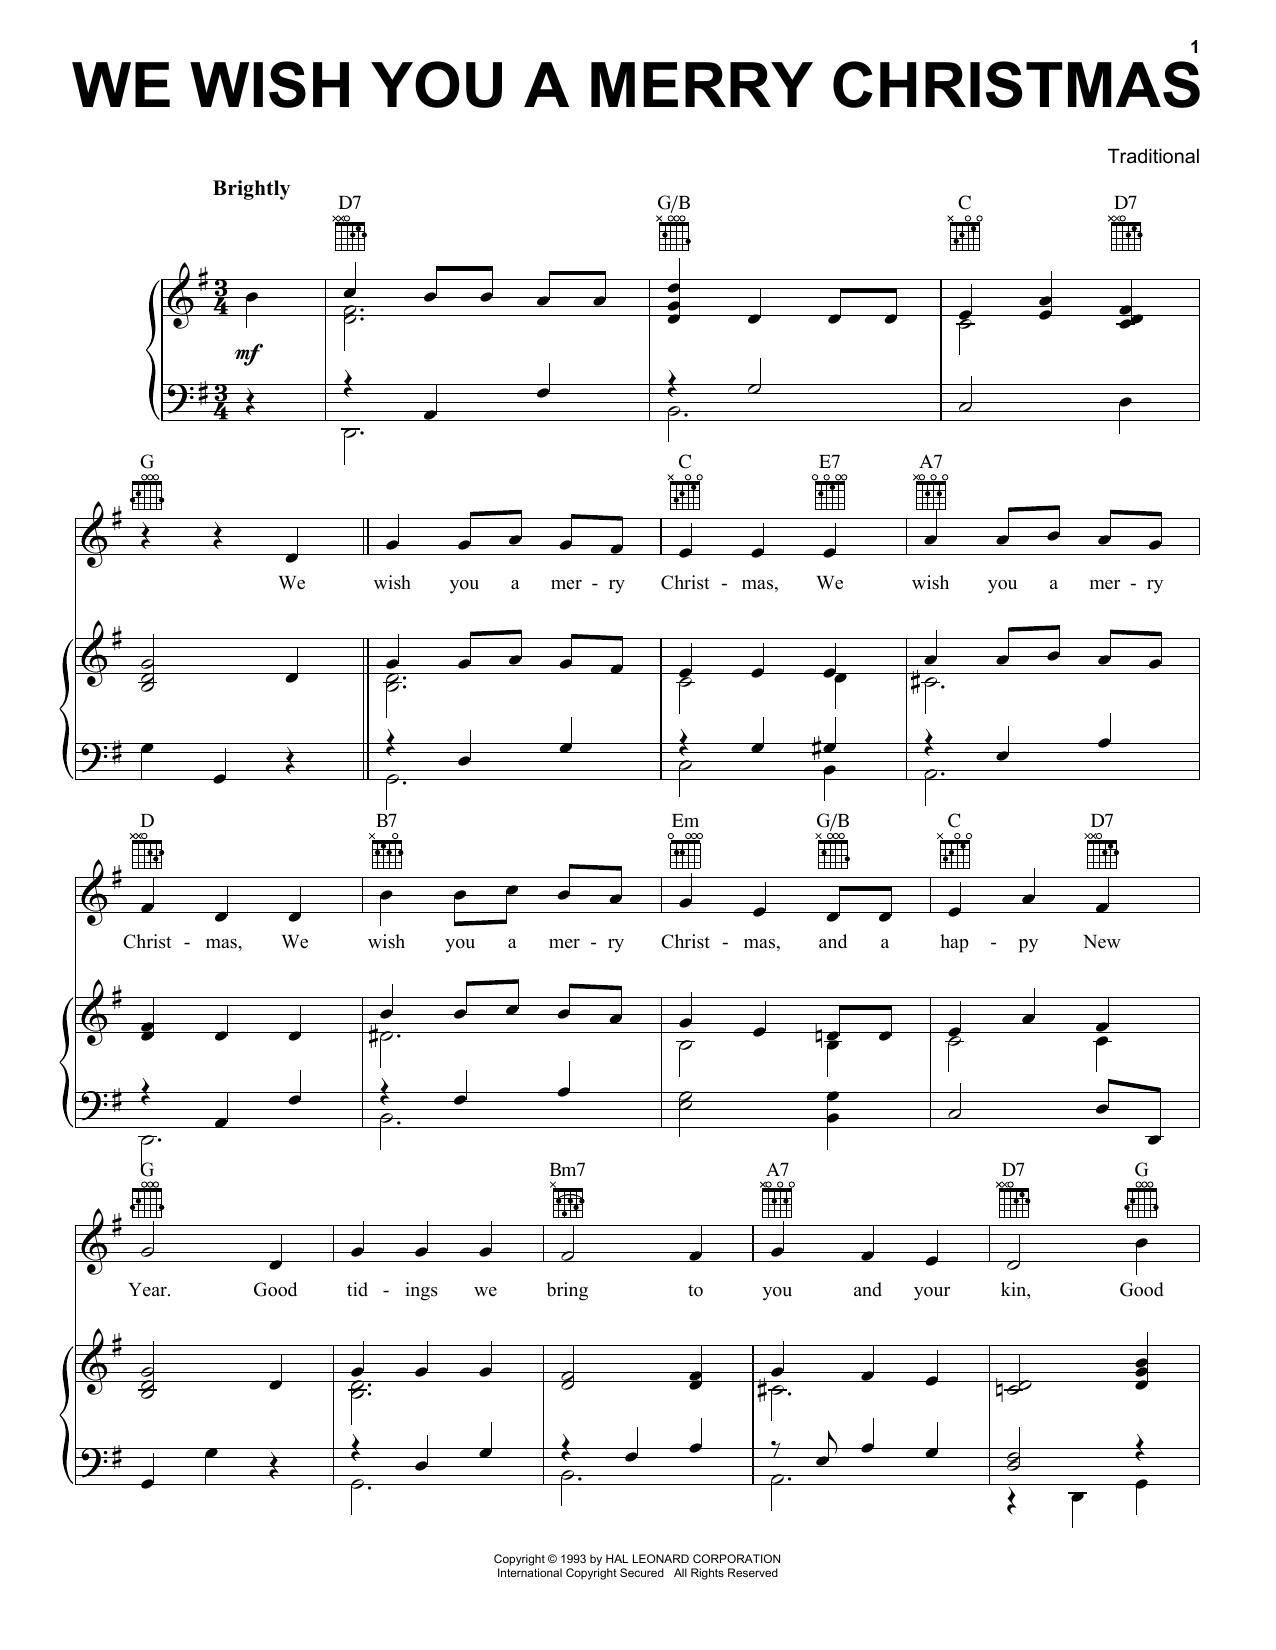 Traditional English Folksong We Wish You A Merry Christmas sheet music notes and chords. Download Printable PDF.